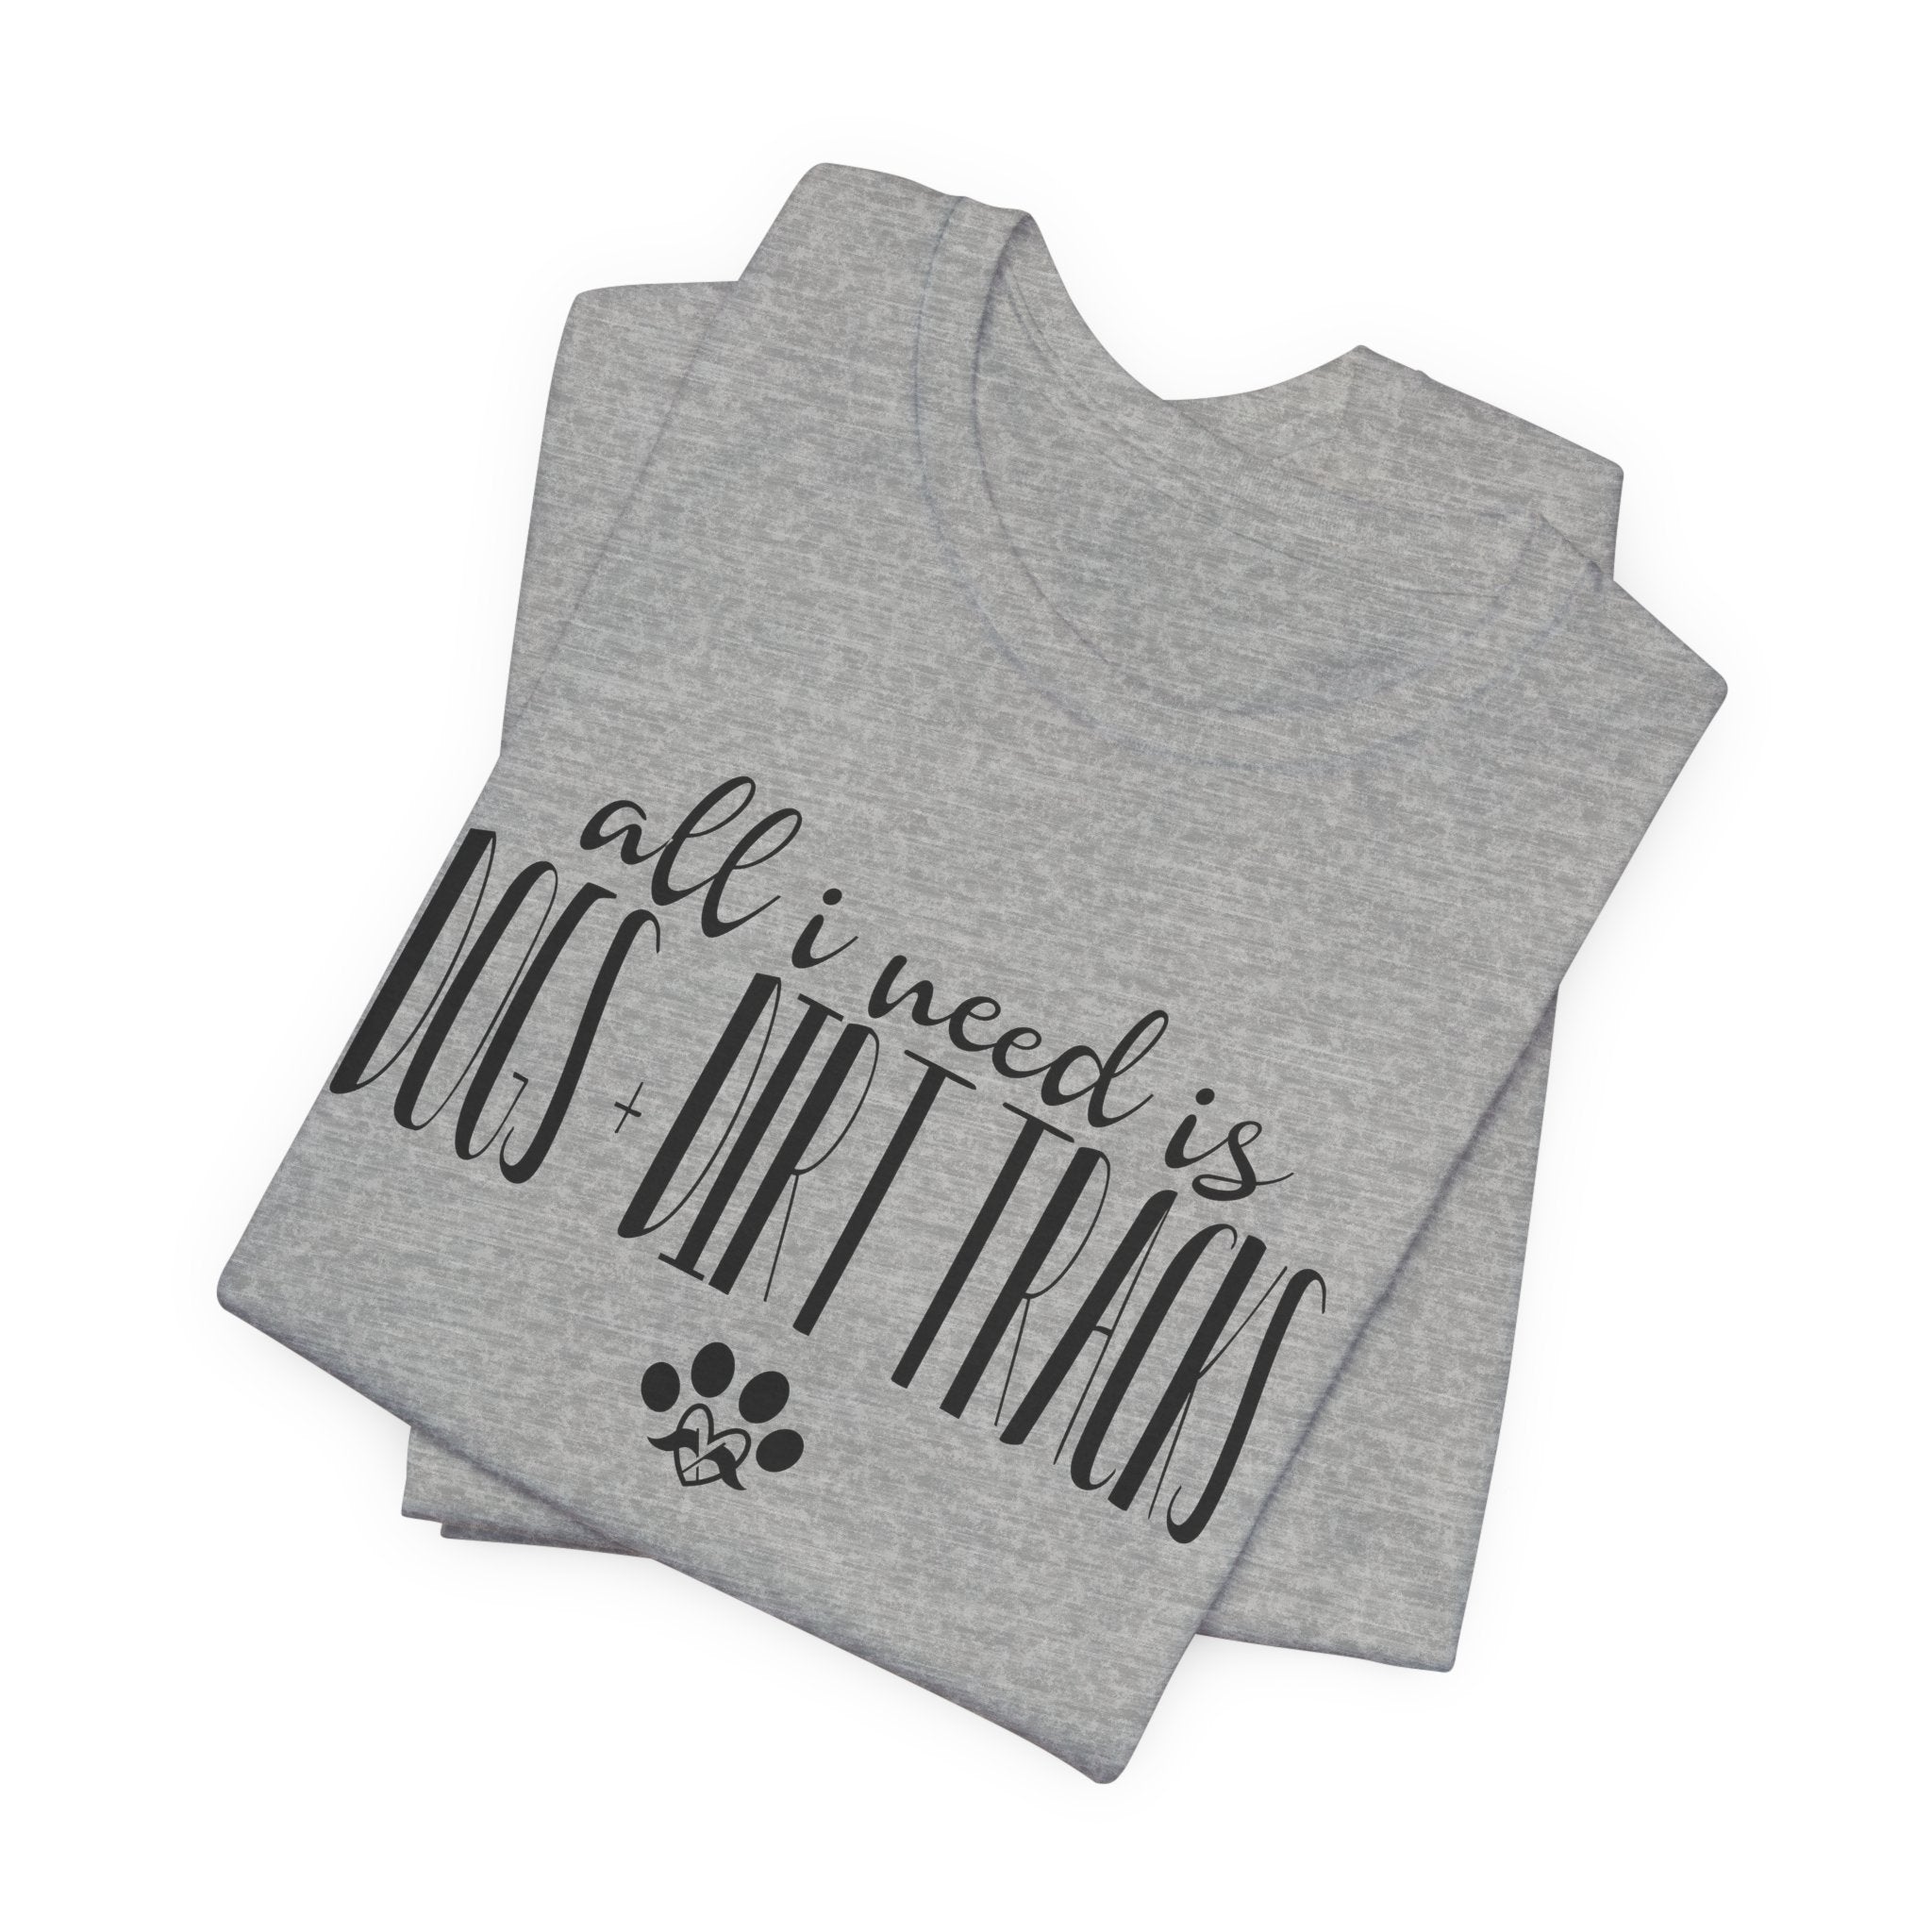 All I Need is Dogs + Dirt Tracks Unisex Raceday T-Shirt for Women